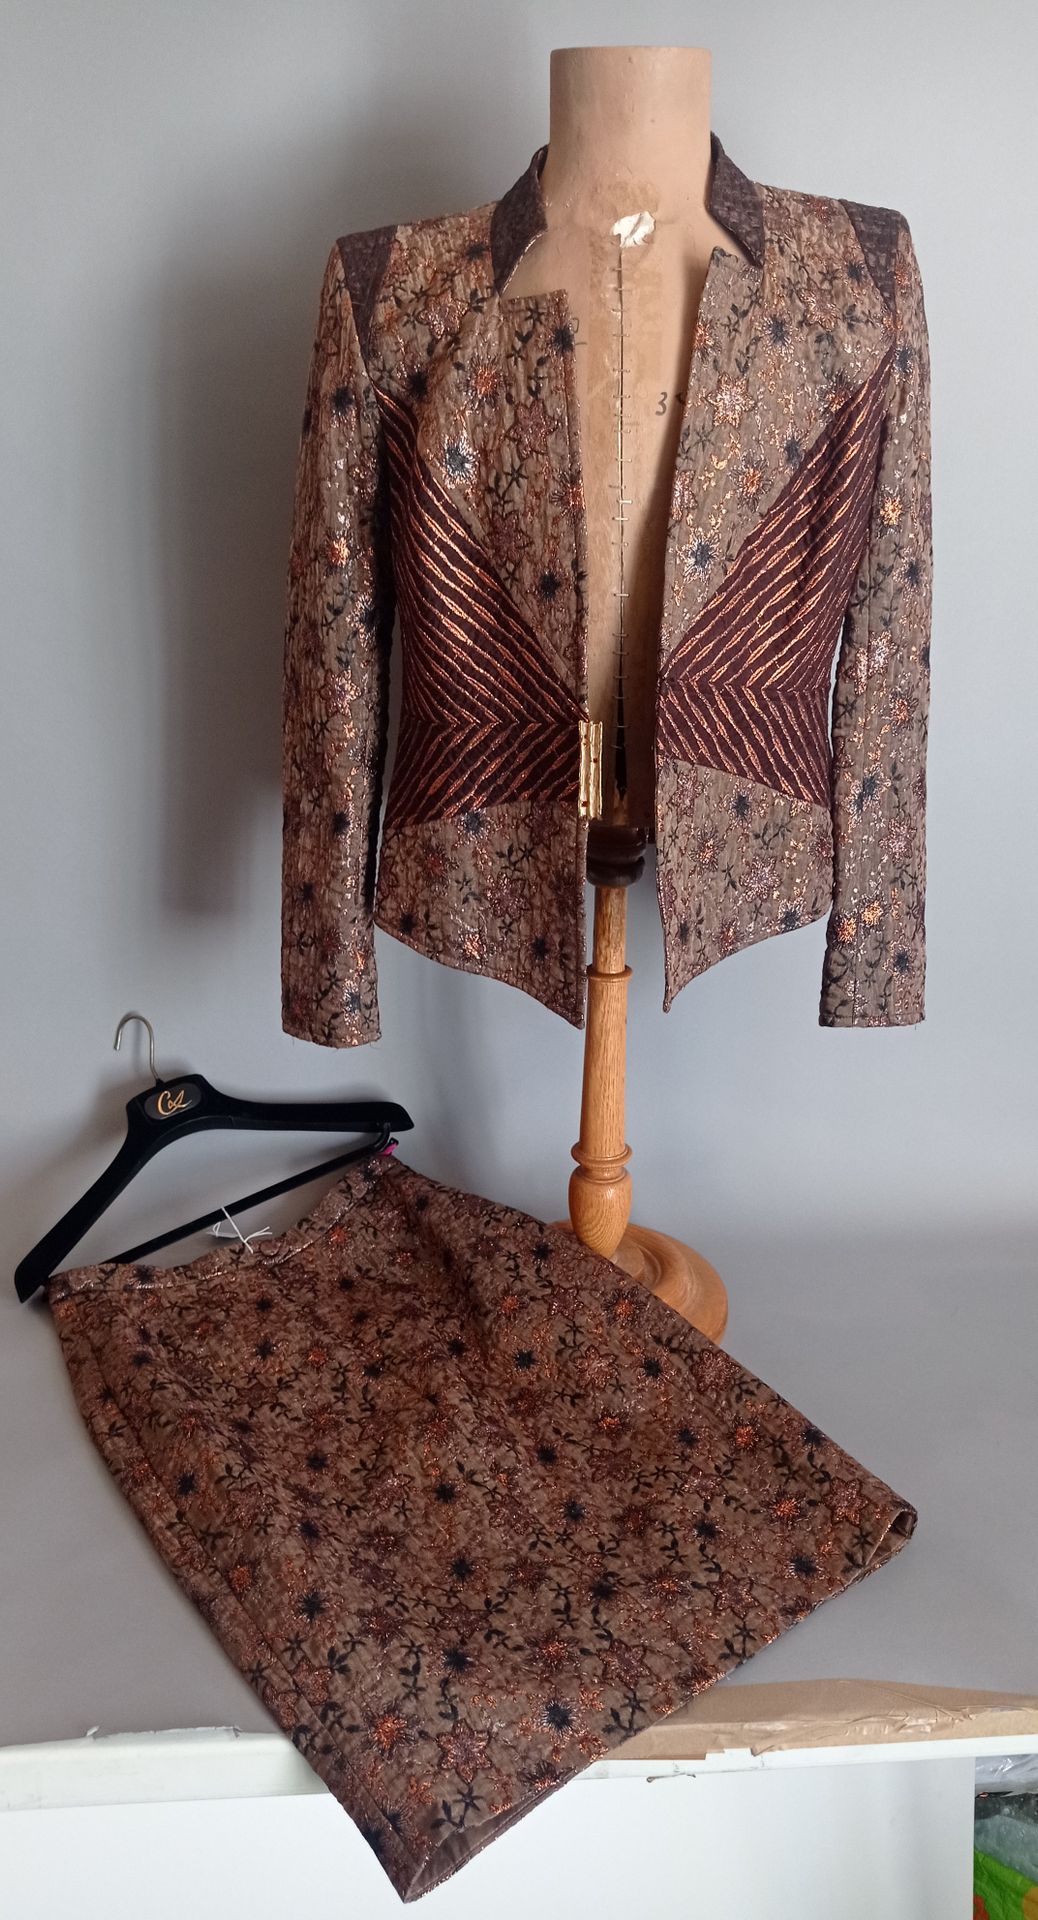 Christian LACROIX Skirt suit in viscose
Size 44